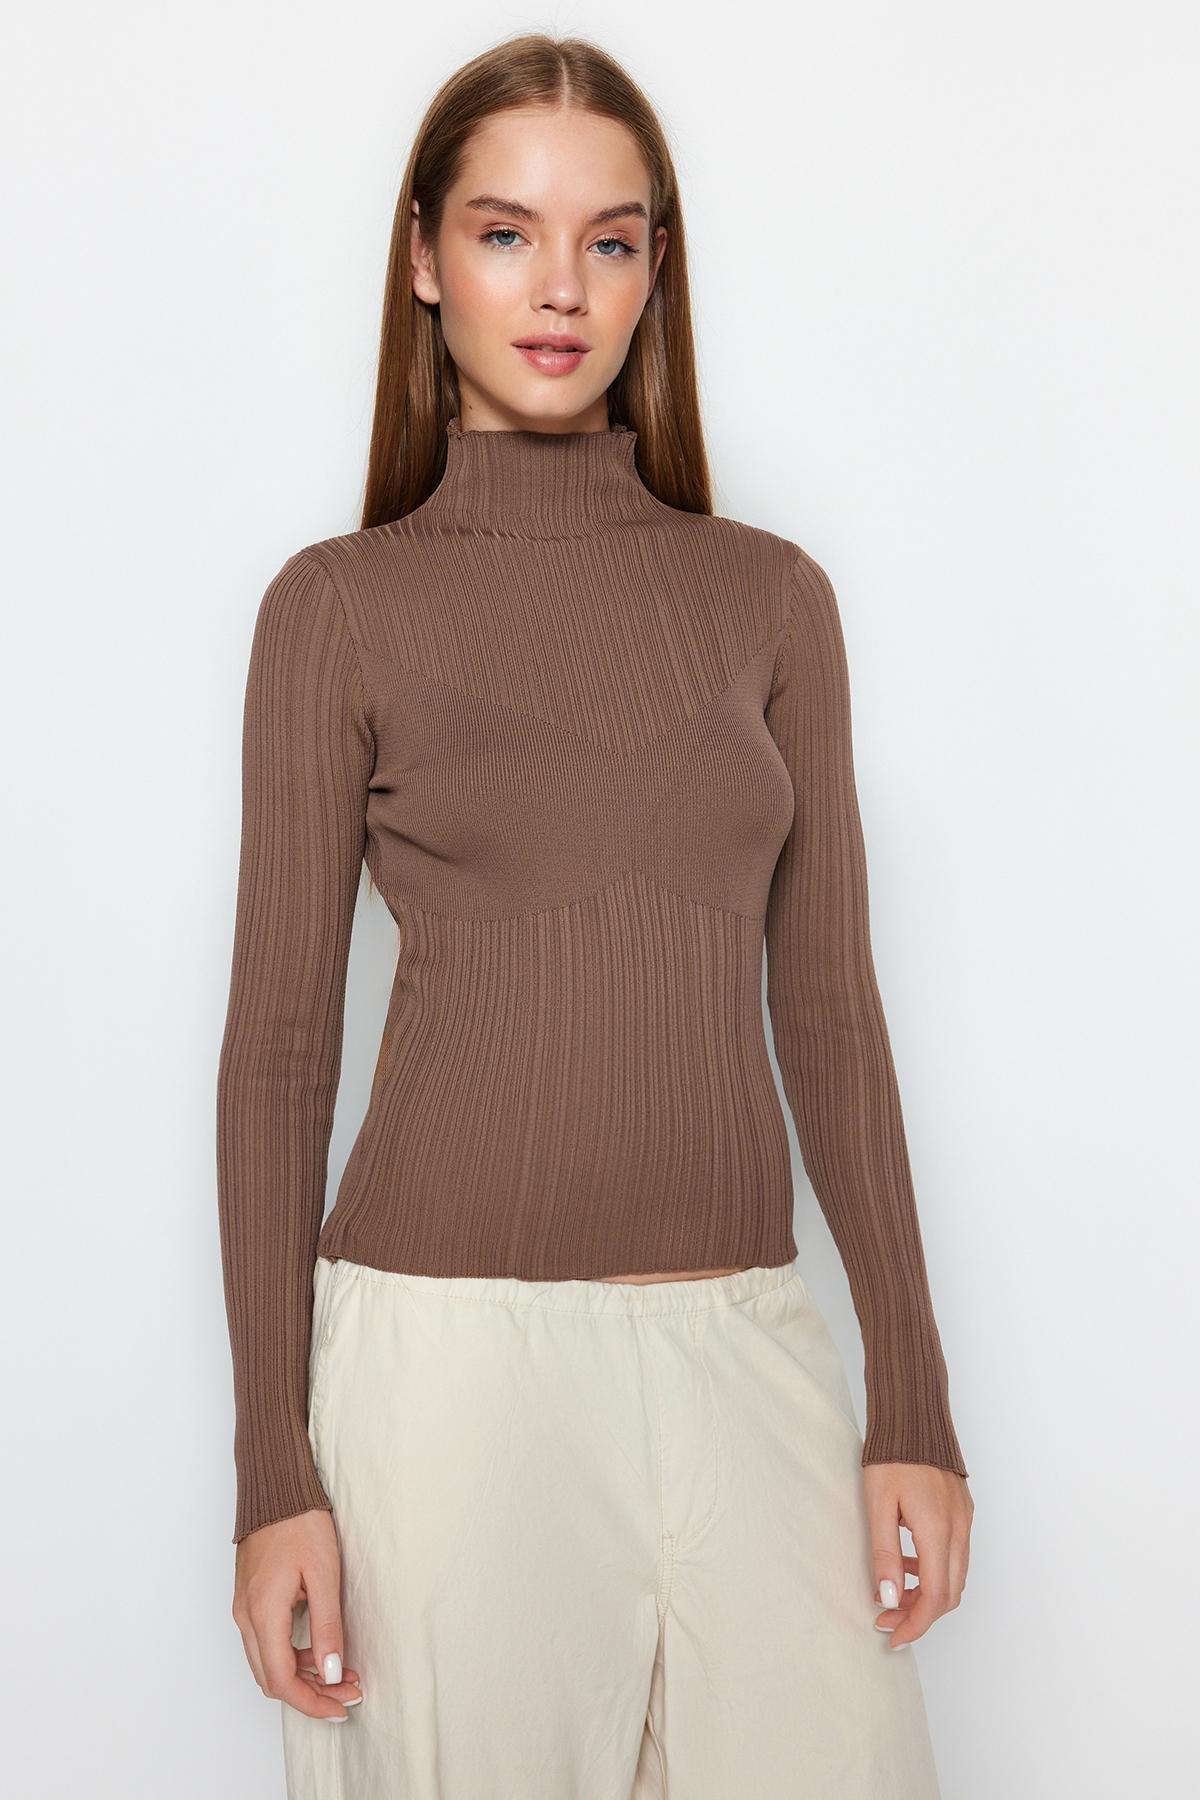 Trendyol - Green Collared Knitted Sweater